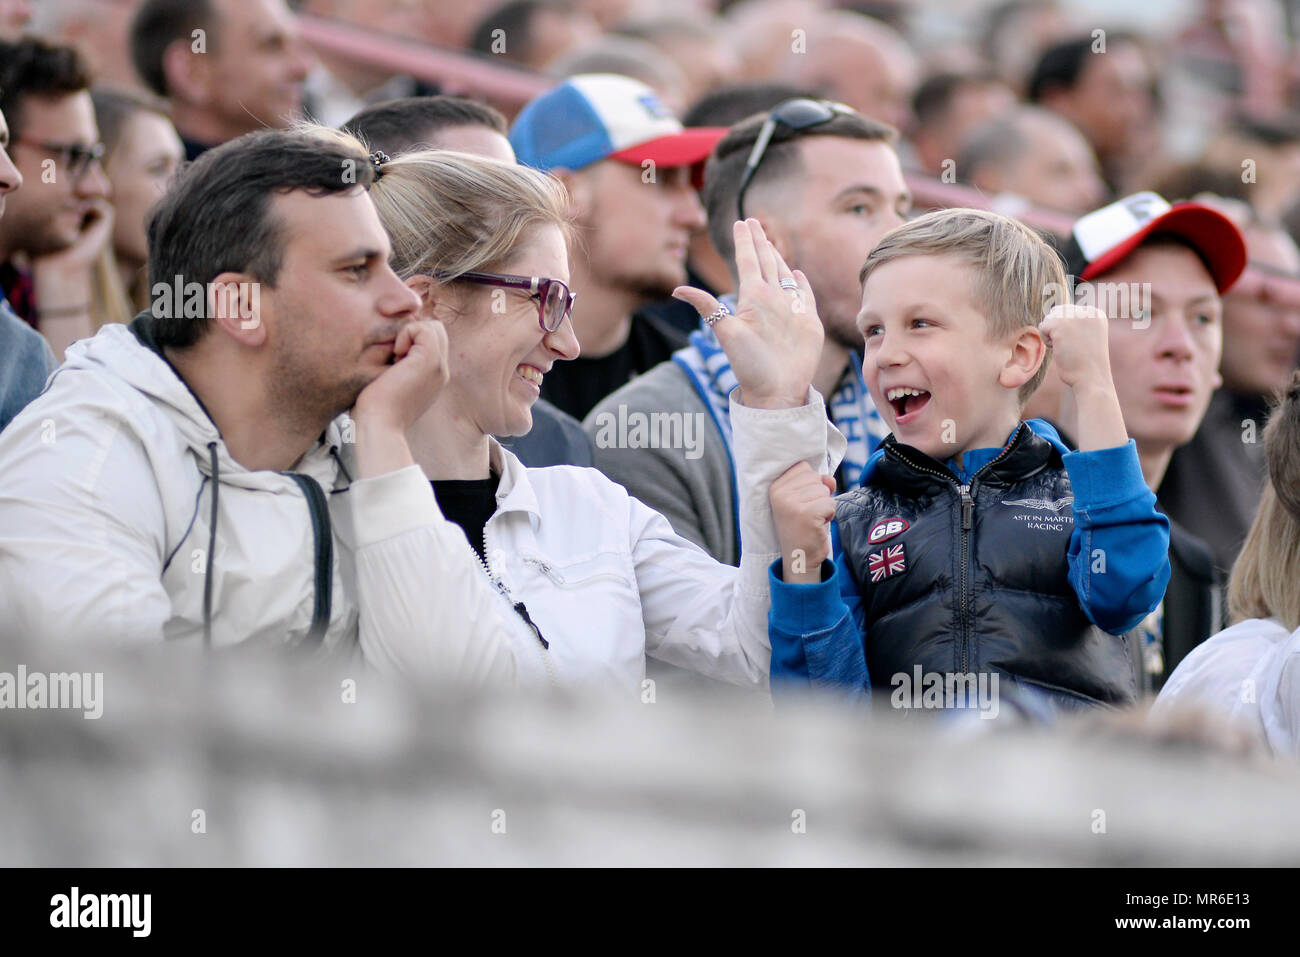 MINSK, BELARUS - MAY 23, 2018: Happy family celebrates victory during the Belarusian Premier League football match between FC Dynamo Minsk and FC Bate at the Tractor stadium. Stock Photo